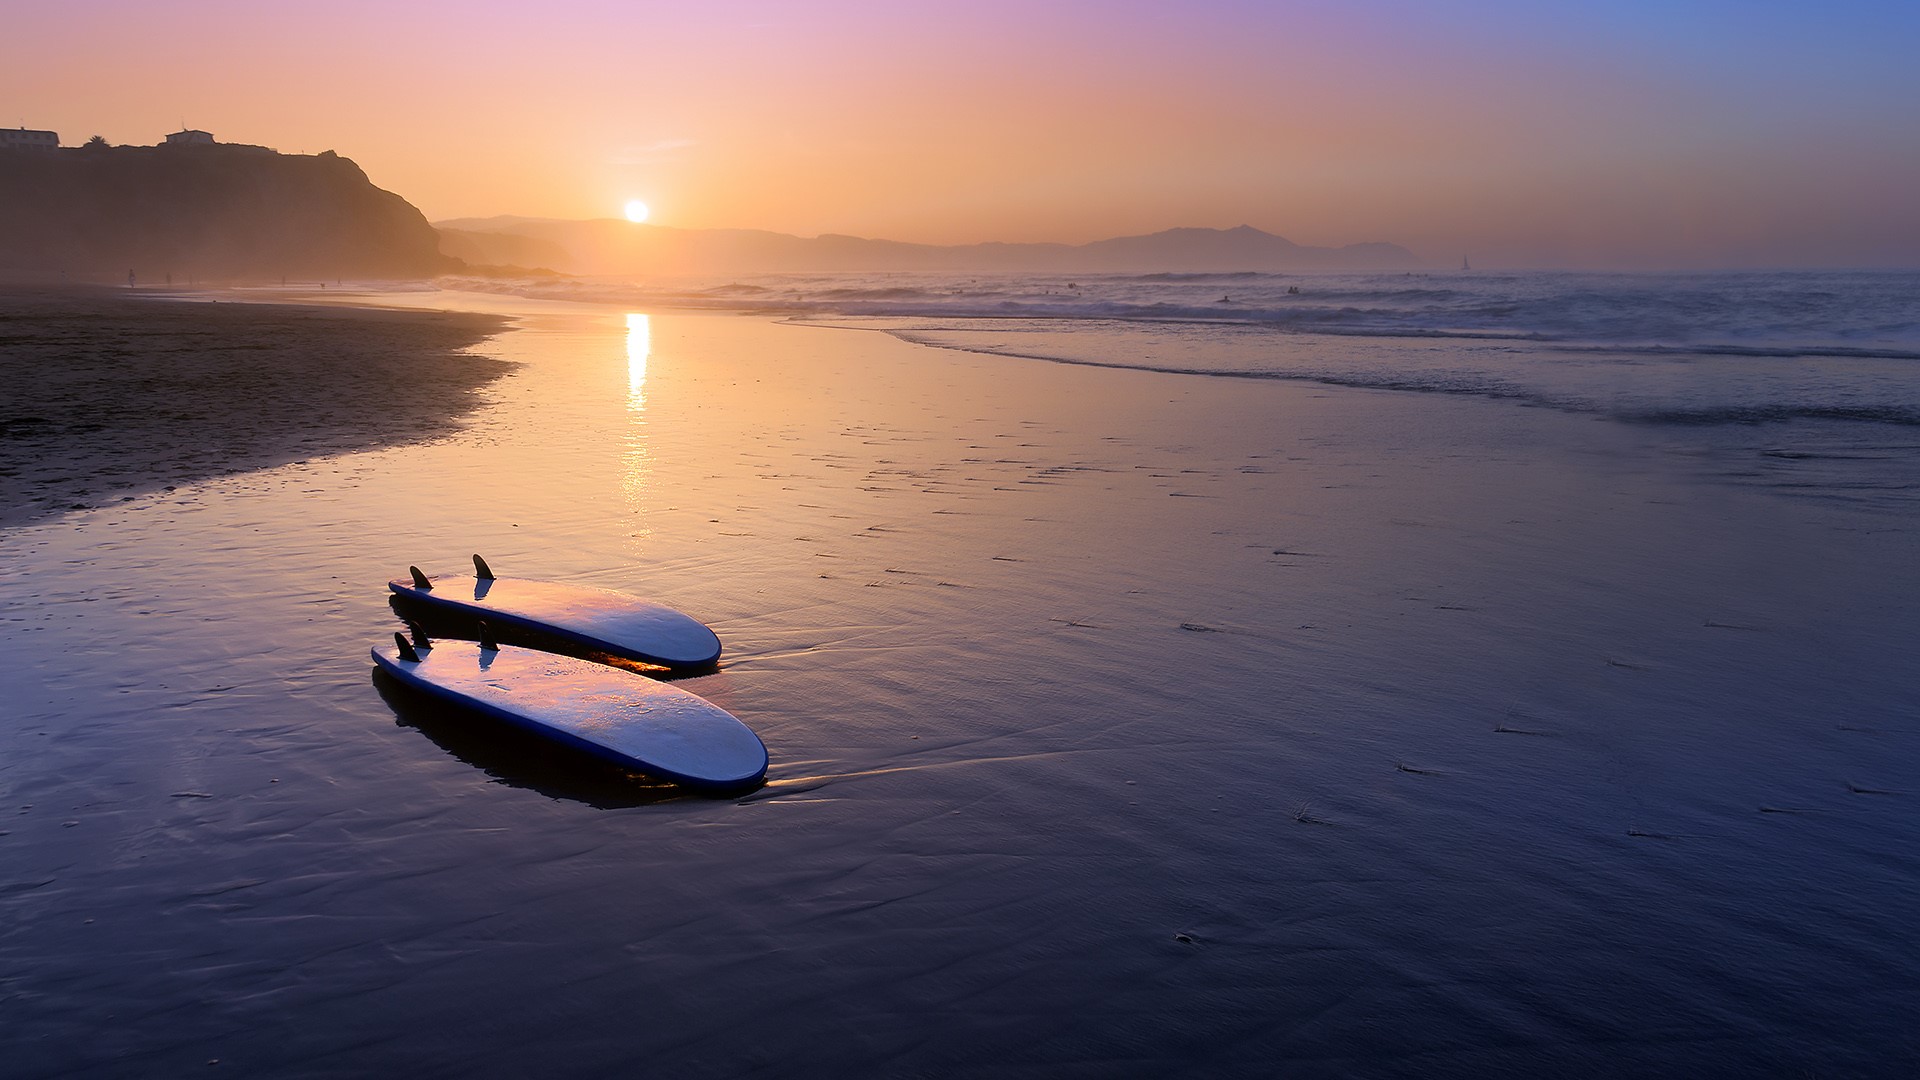 Nature Landscape Sun Sunset Surfboards Reflection Mountains House Mist Water Waves Spain 1920x1080